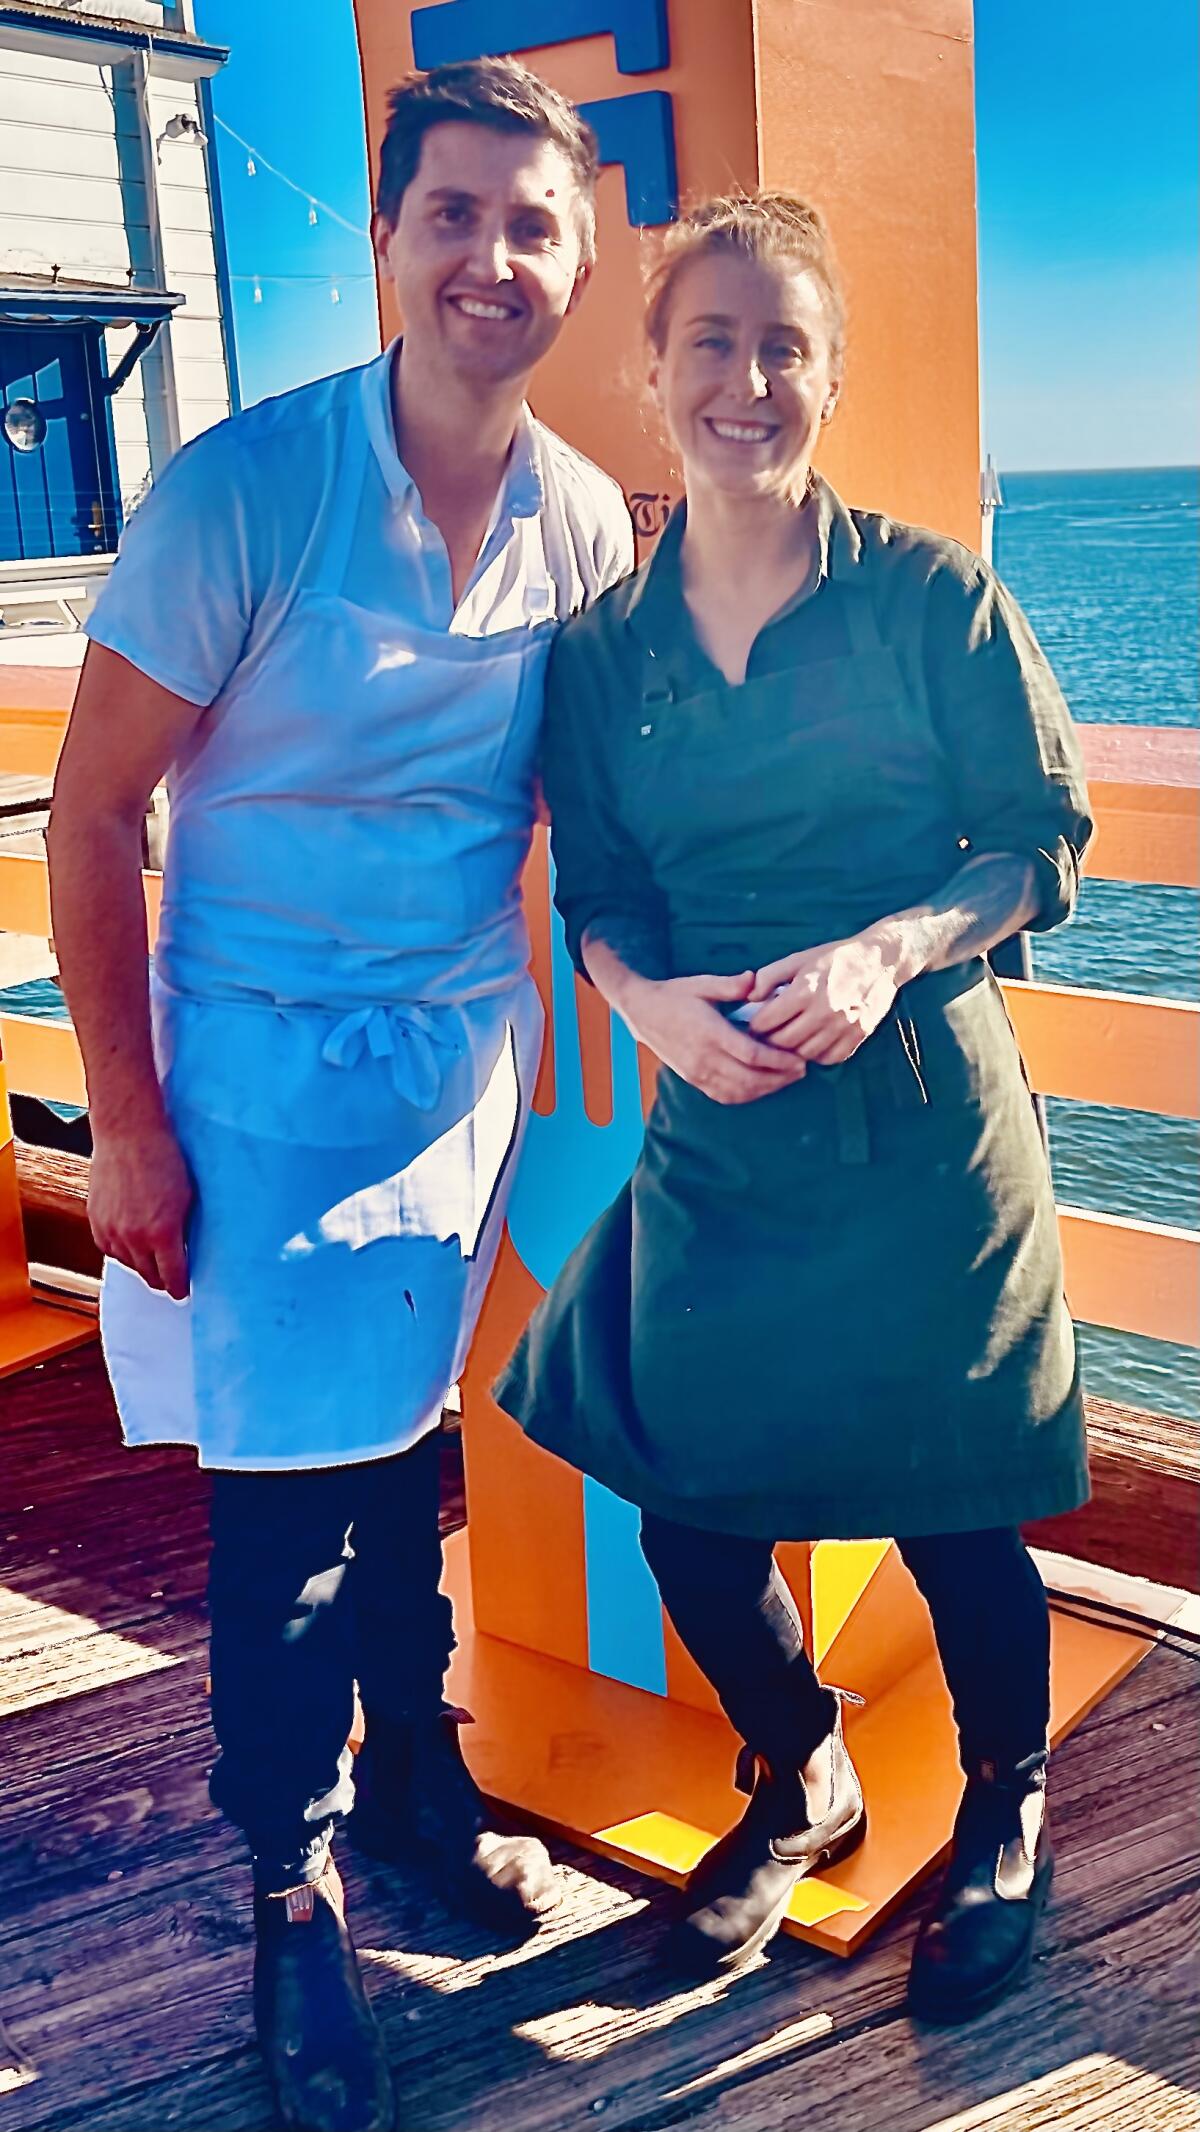 Chefs Josh Niland and Jo Barrett smiling in aprons standing on a pier.